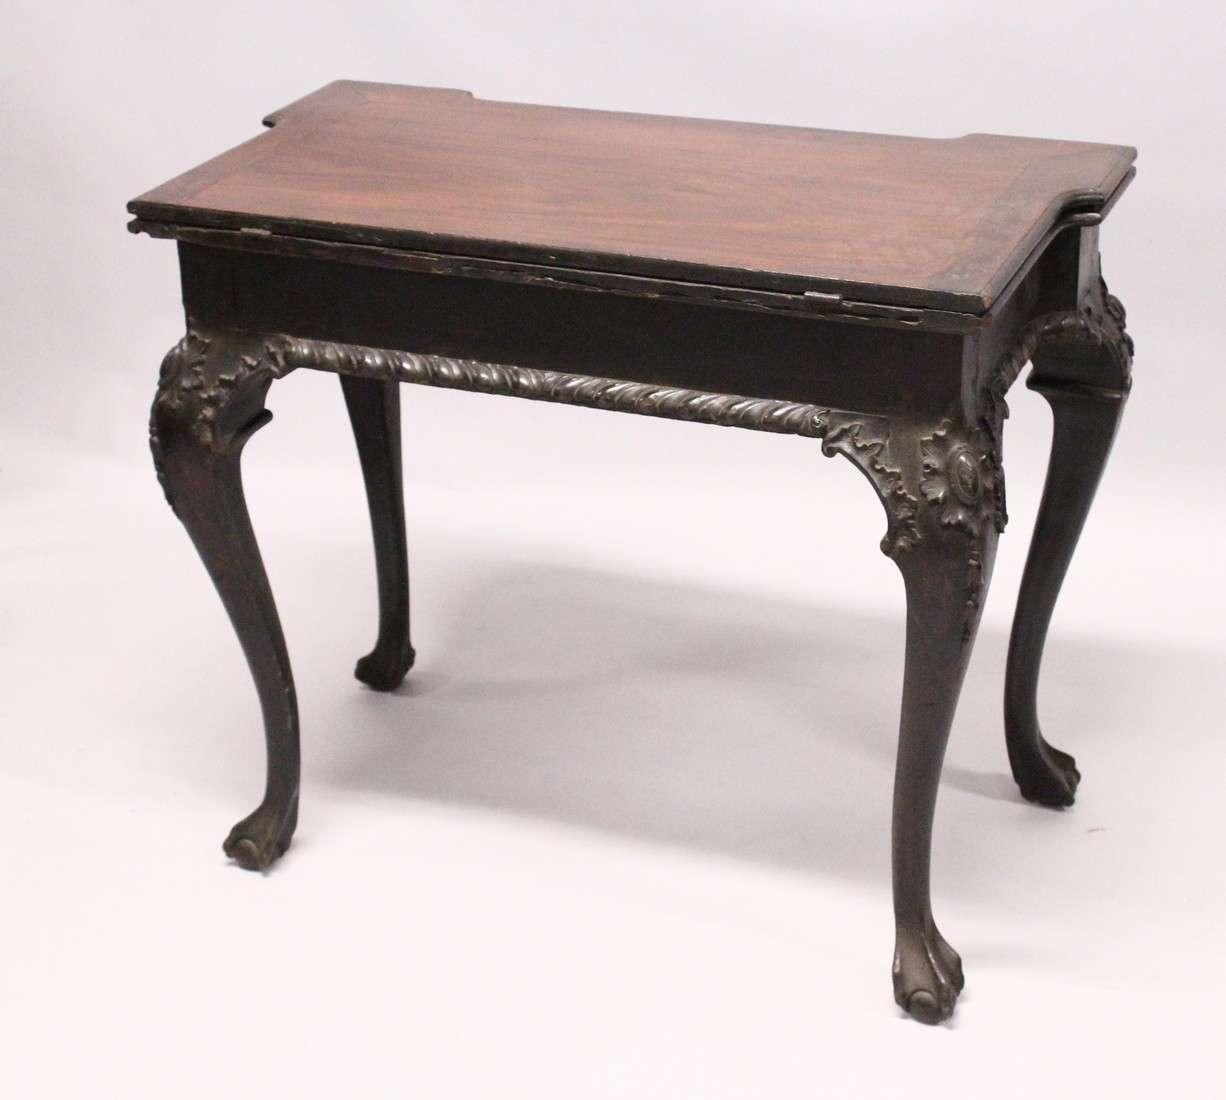 A GEORGE III MAHOGANY FOLD OVER CARD TABLE, possibly Irish, of shaped rectangular outline, a - Image 9 of 10